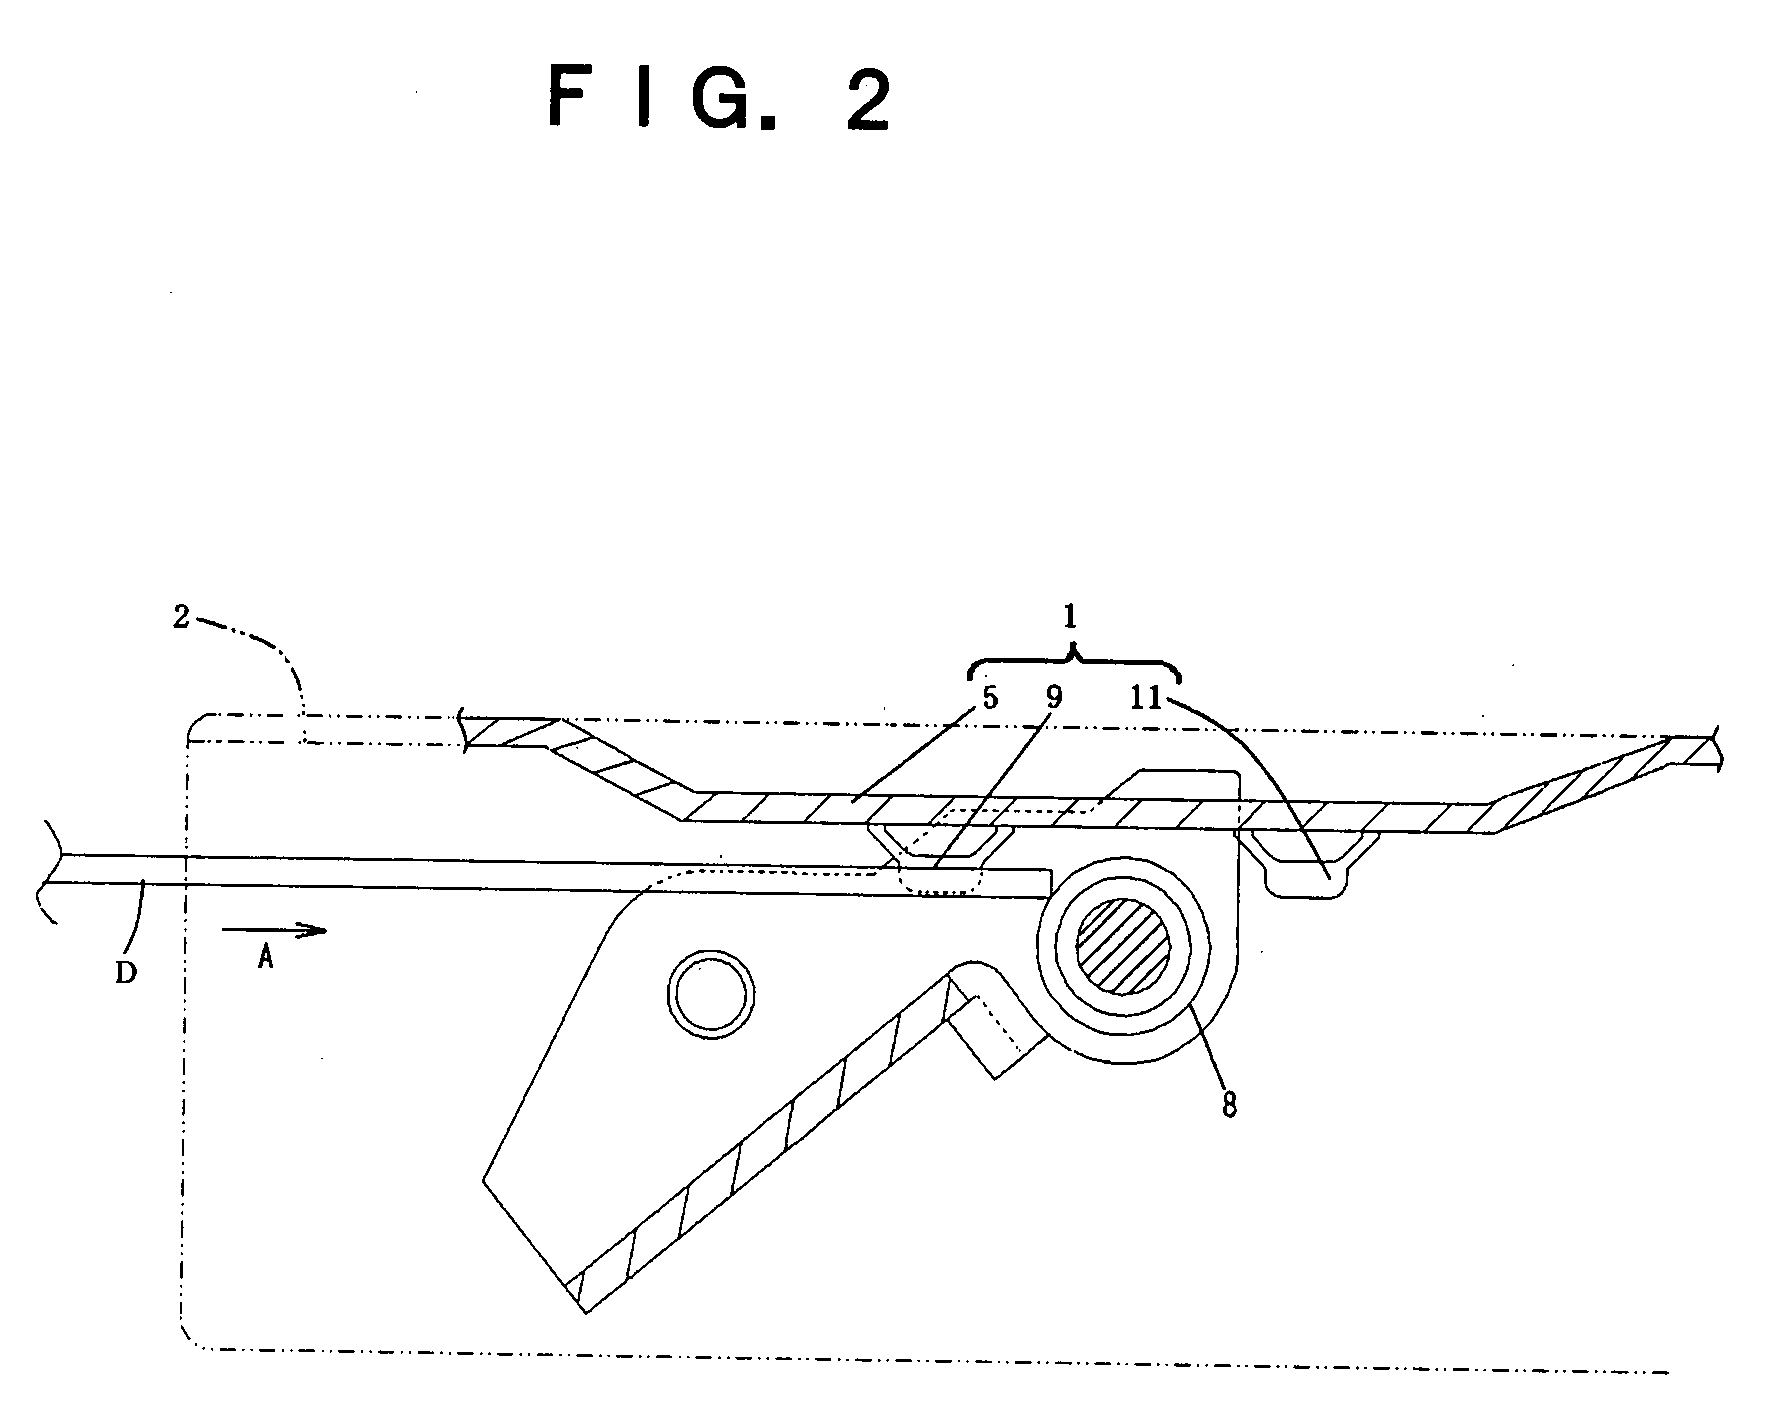 Disc guide of disc carrying device